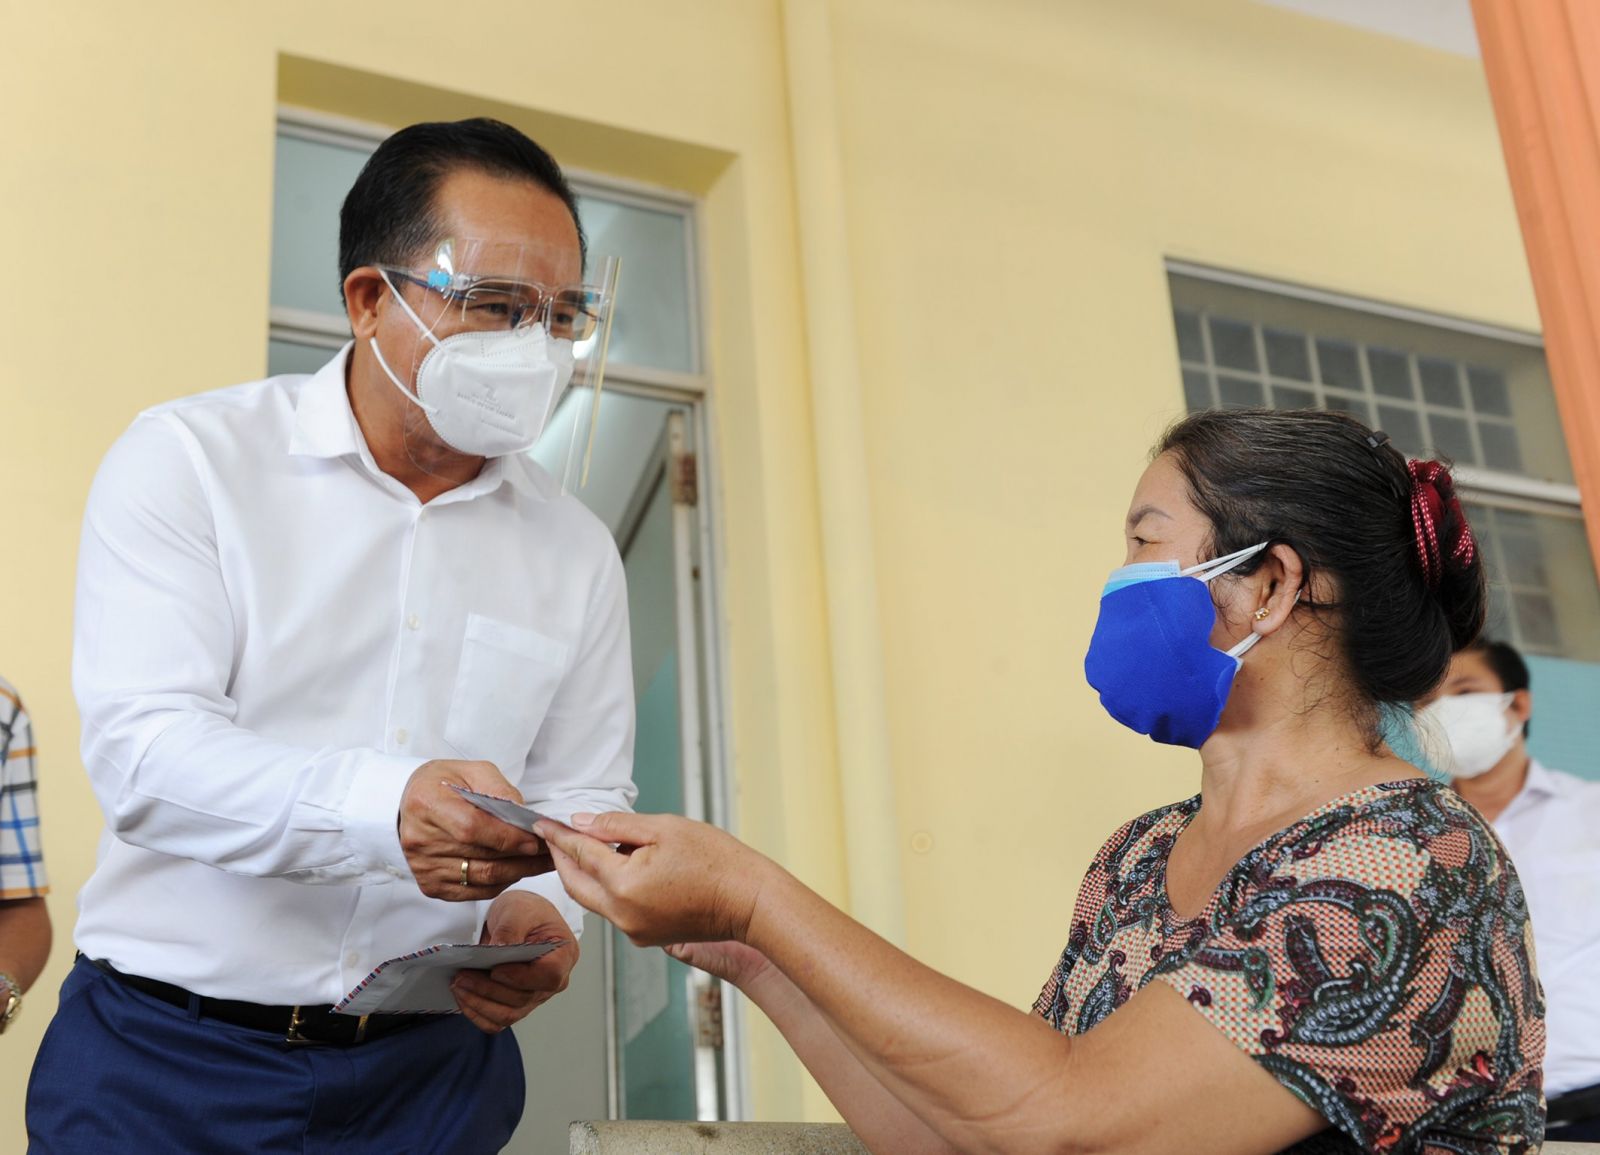 Secretary of the Provincial Party Committee – Nguyen Van Duoc also comes to give money to support freelancers facing difficulties due to the Covid-19 pandemic